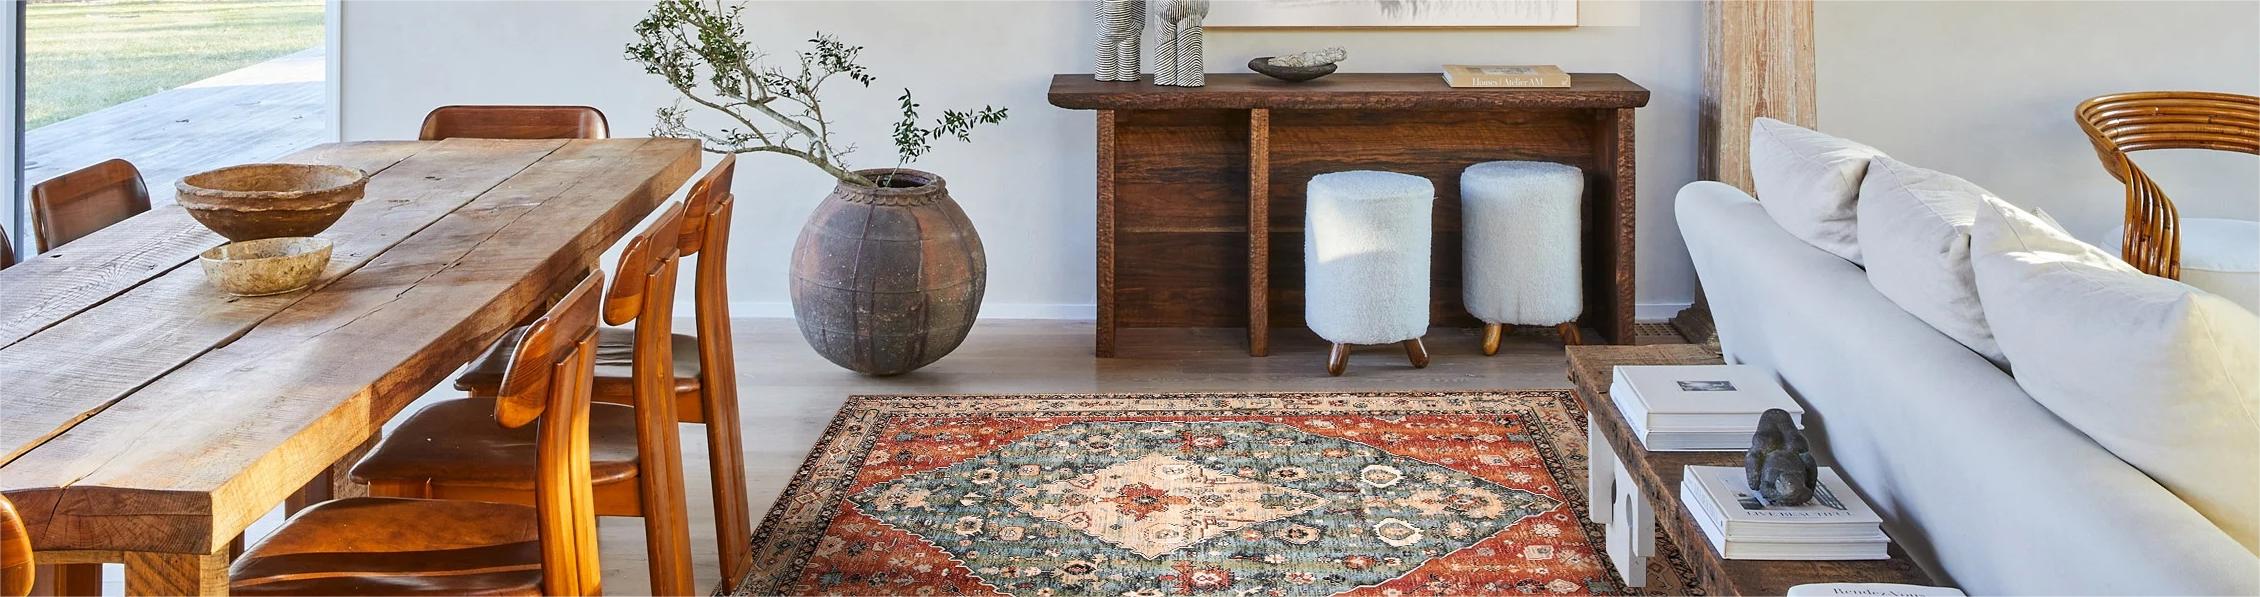 How To Care For Your Lahome? Tips Behind The Best Washable Rug